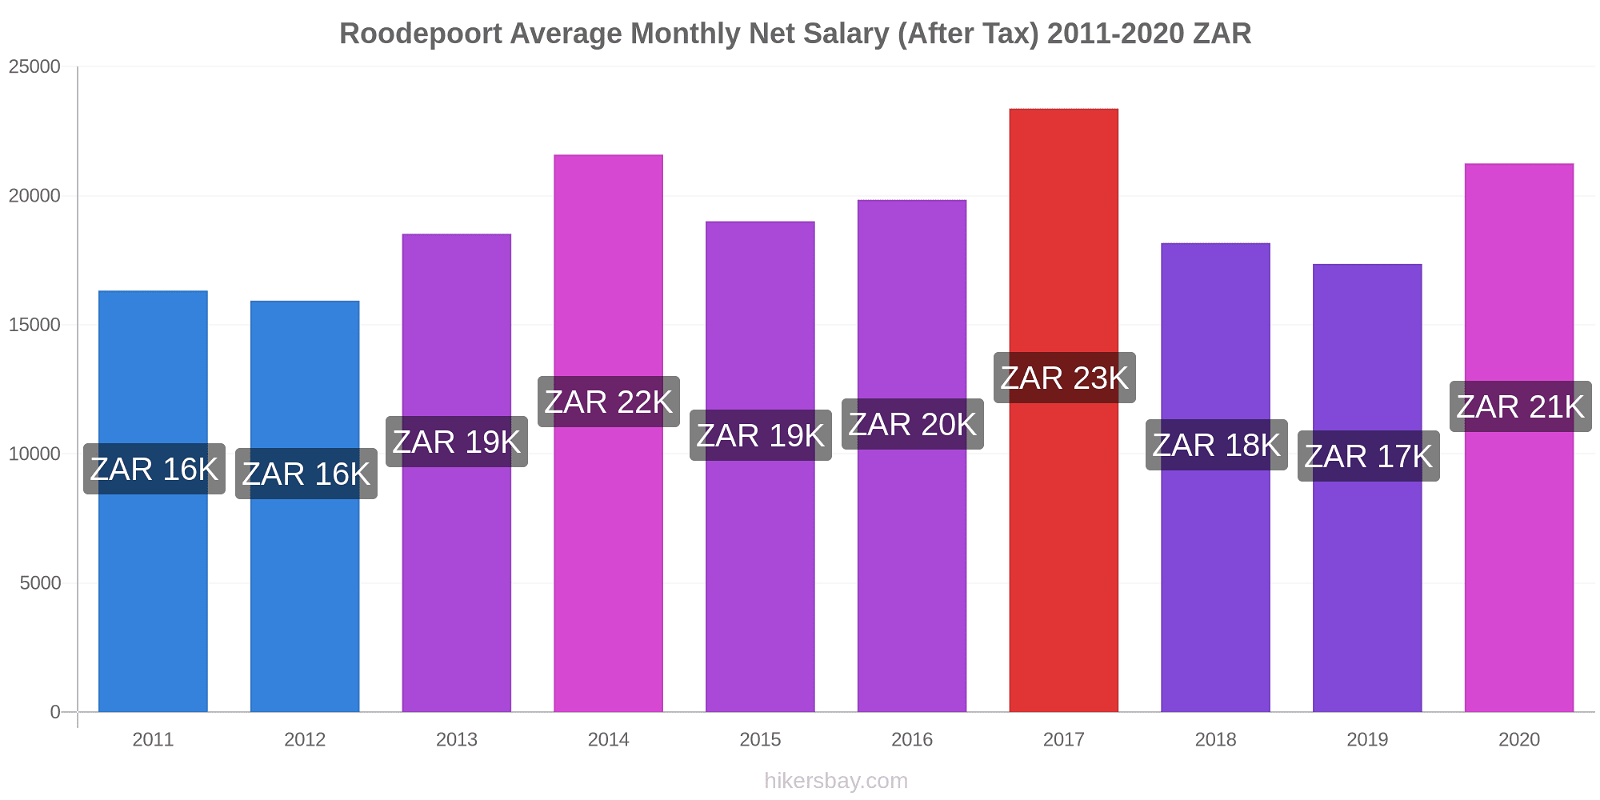 Roodepoort price changes Average Monthly Net Salary (After Tax) hikersbay.com